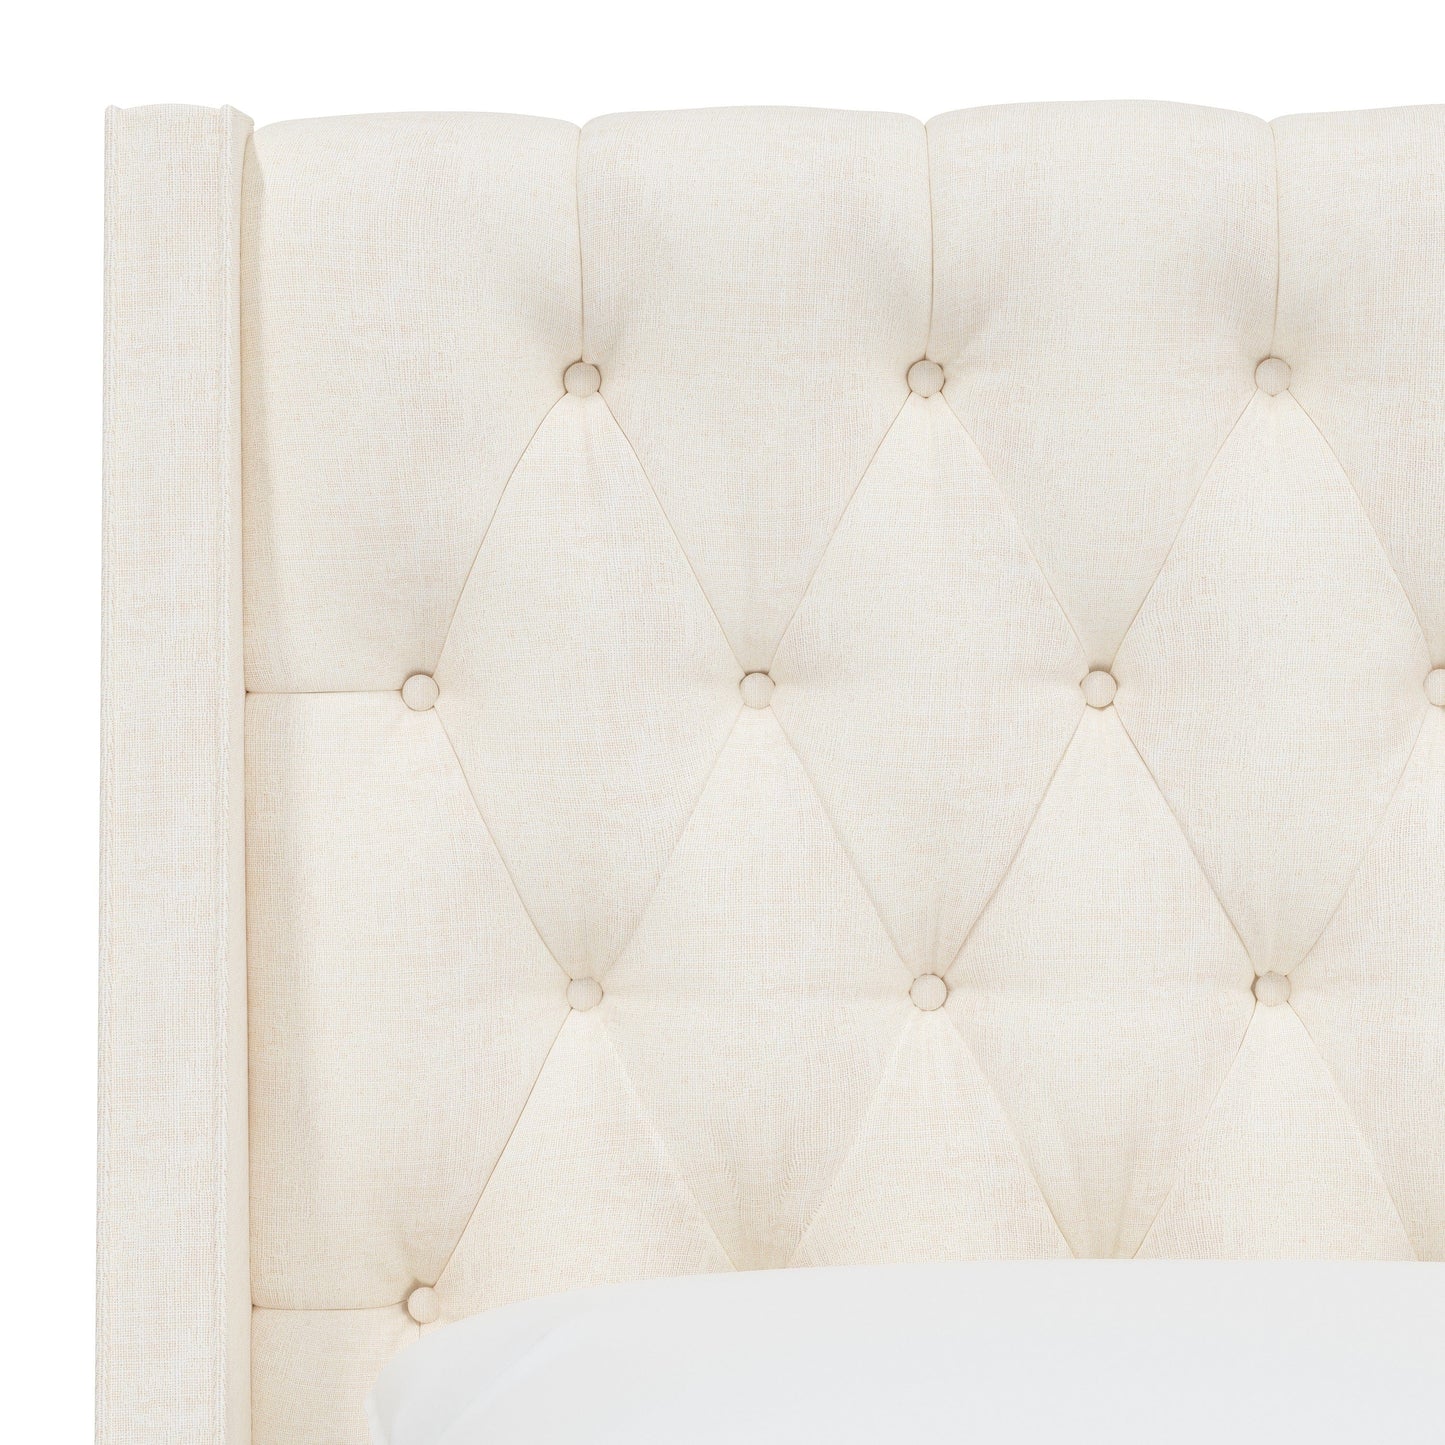 Skyline Furniture Queen Loomis Tufted Wingback Bed in Zuma Linen